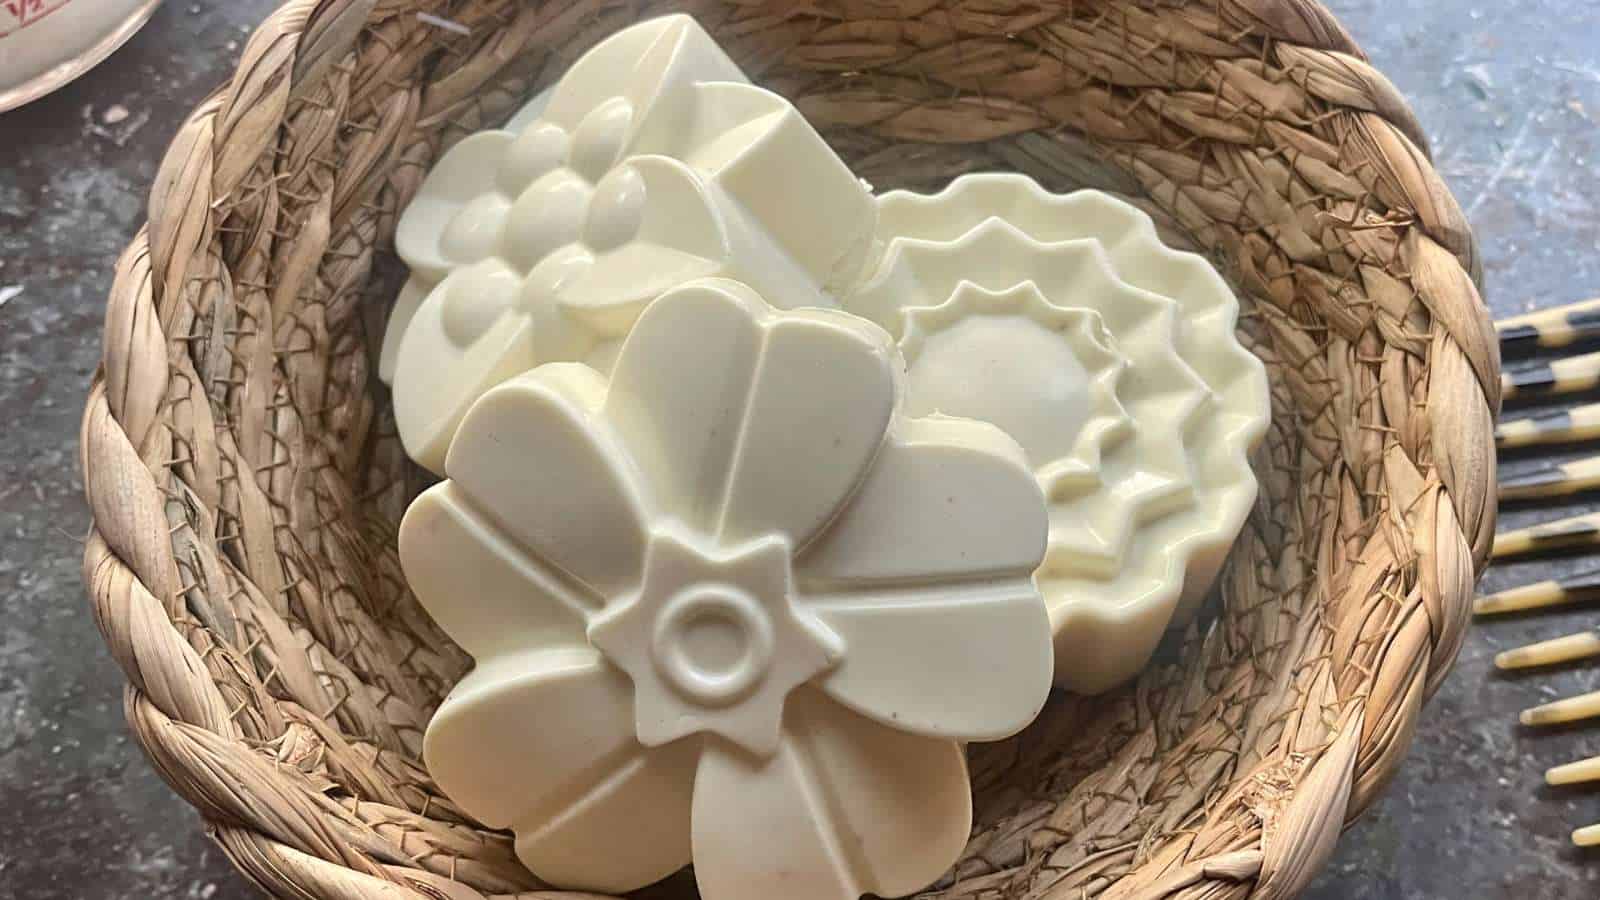 White homemade shampoo bars in a wicker basket next to a pair of scissors.